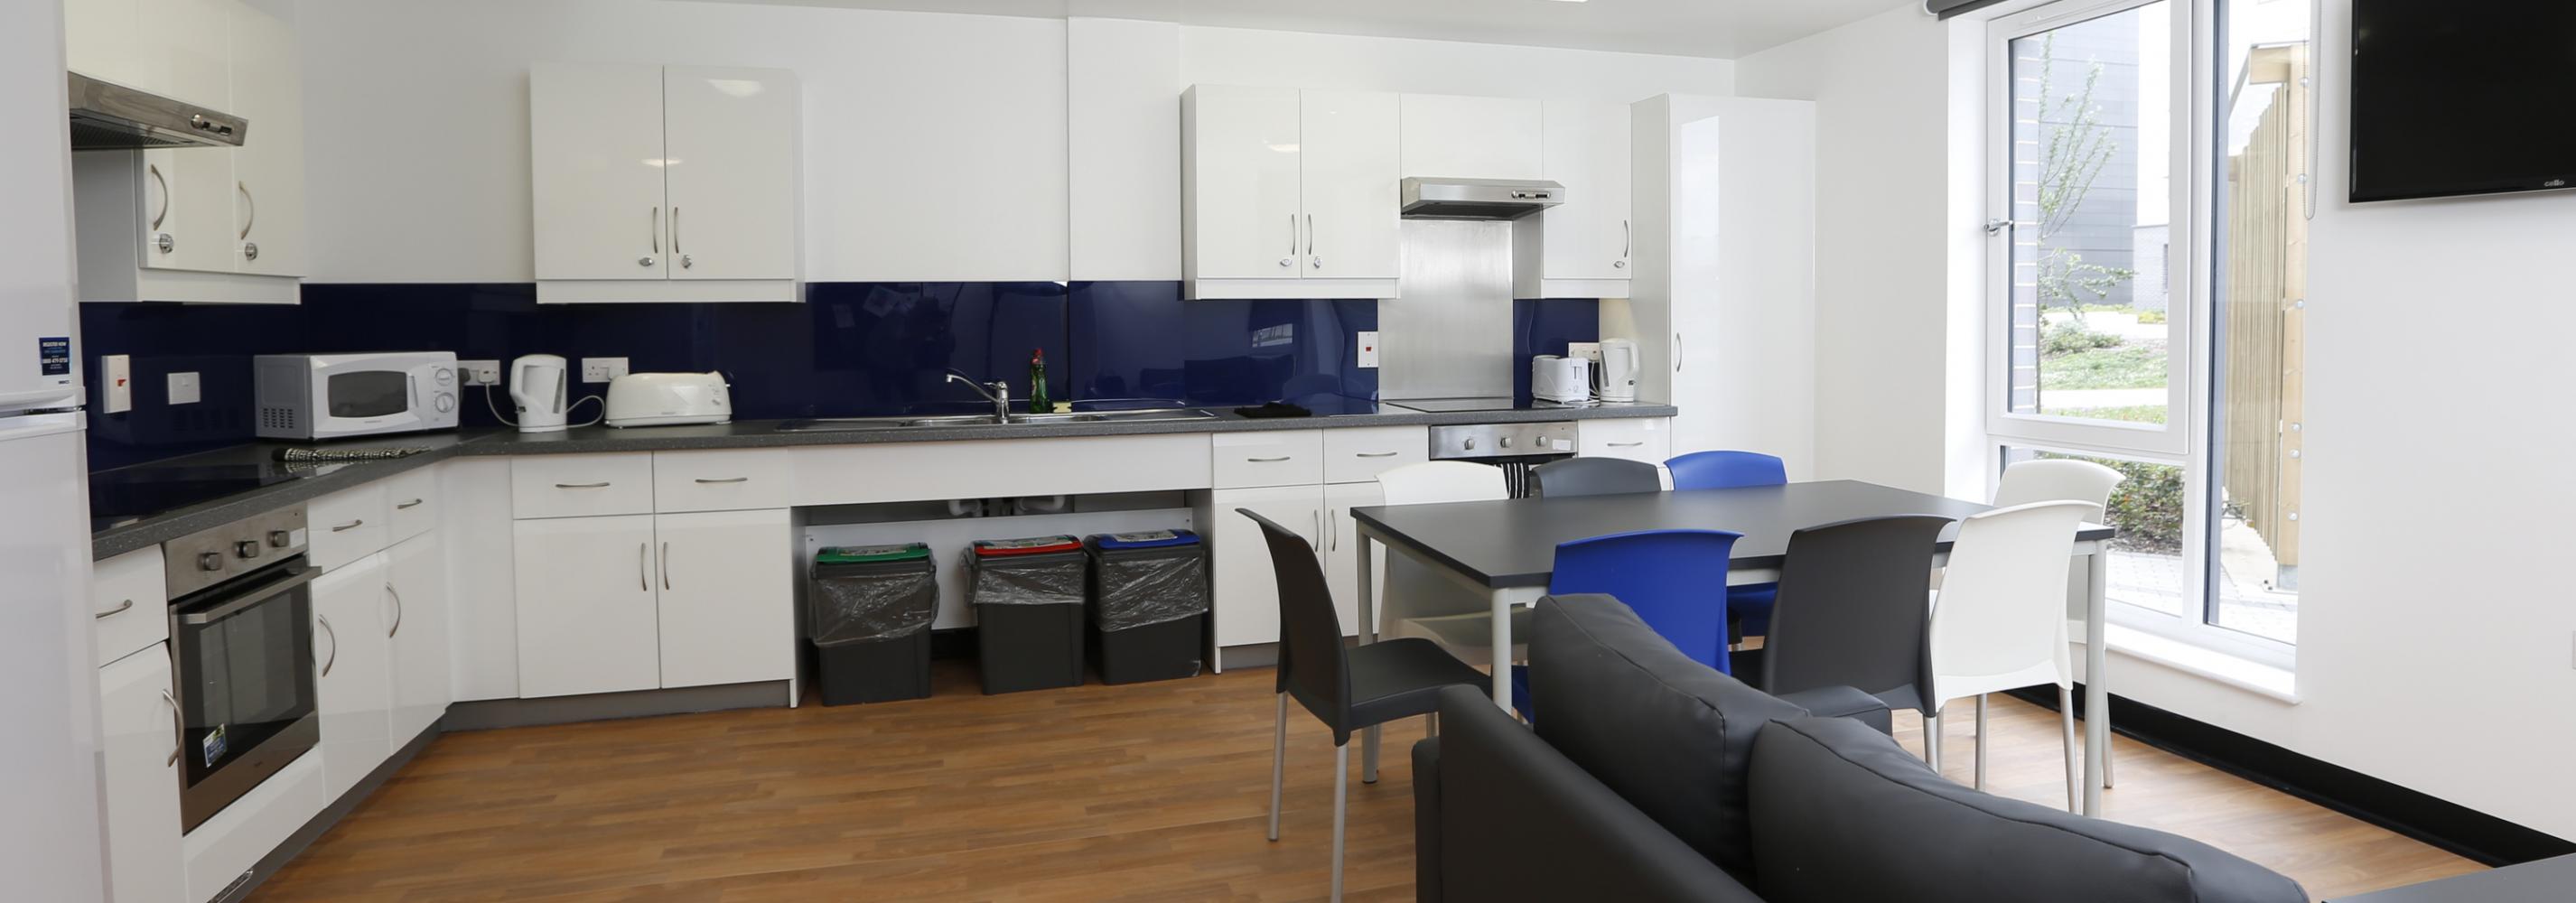 A shared kitchen in College Lane